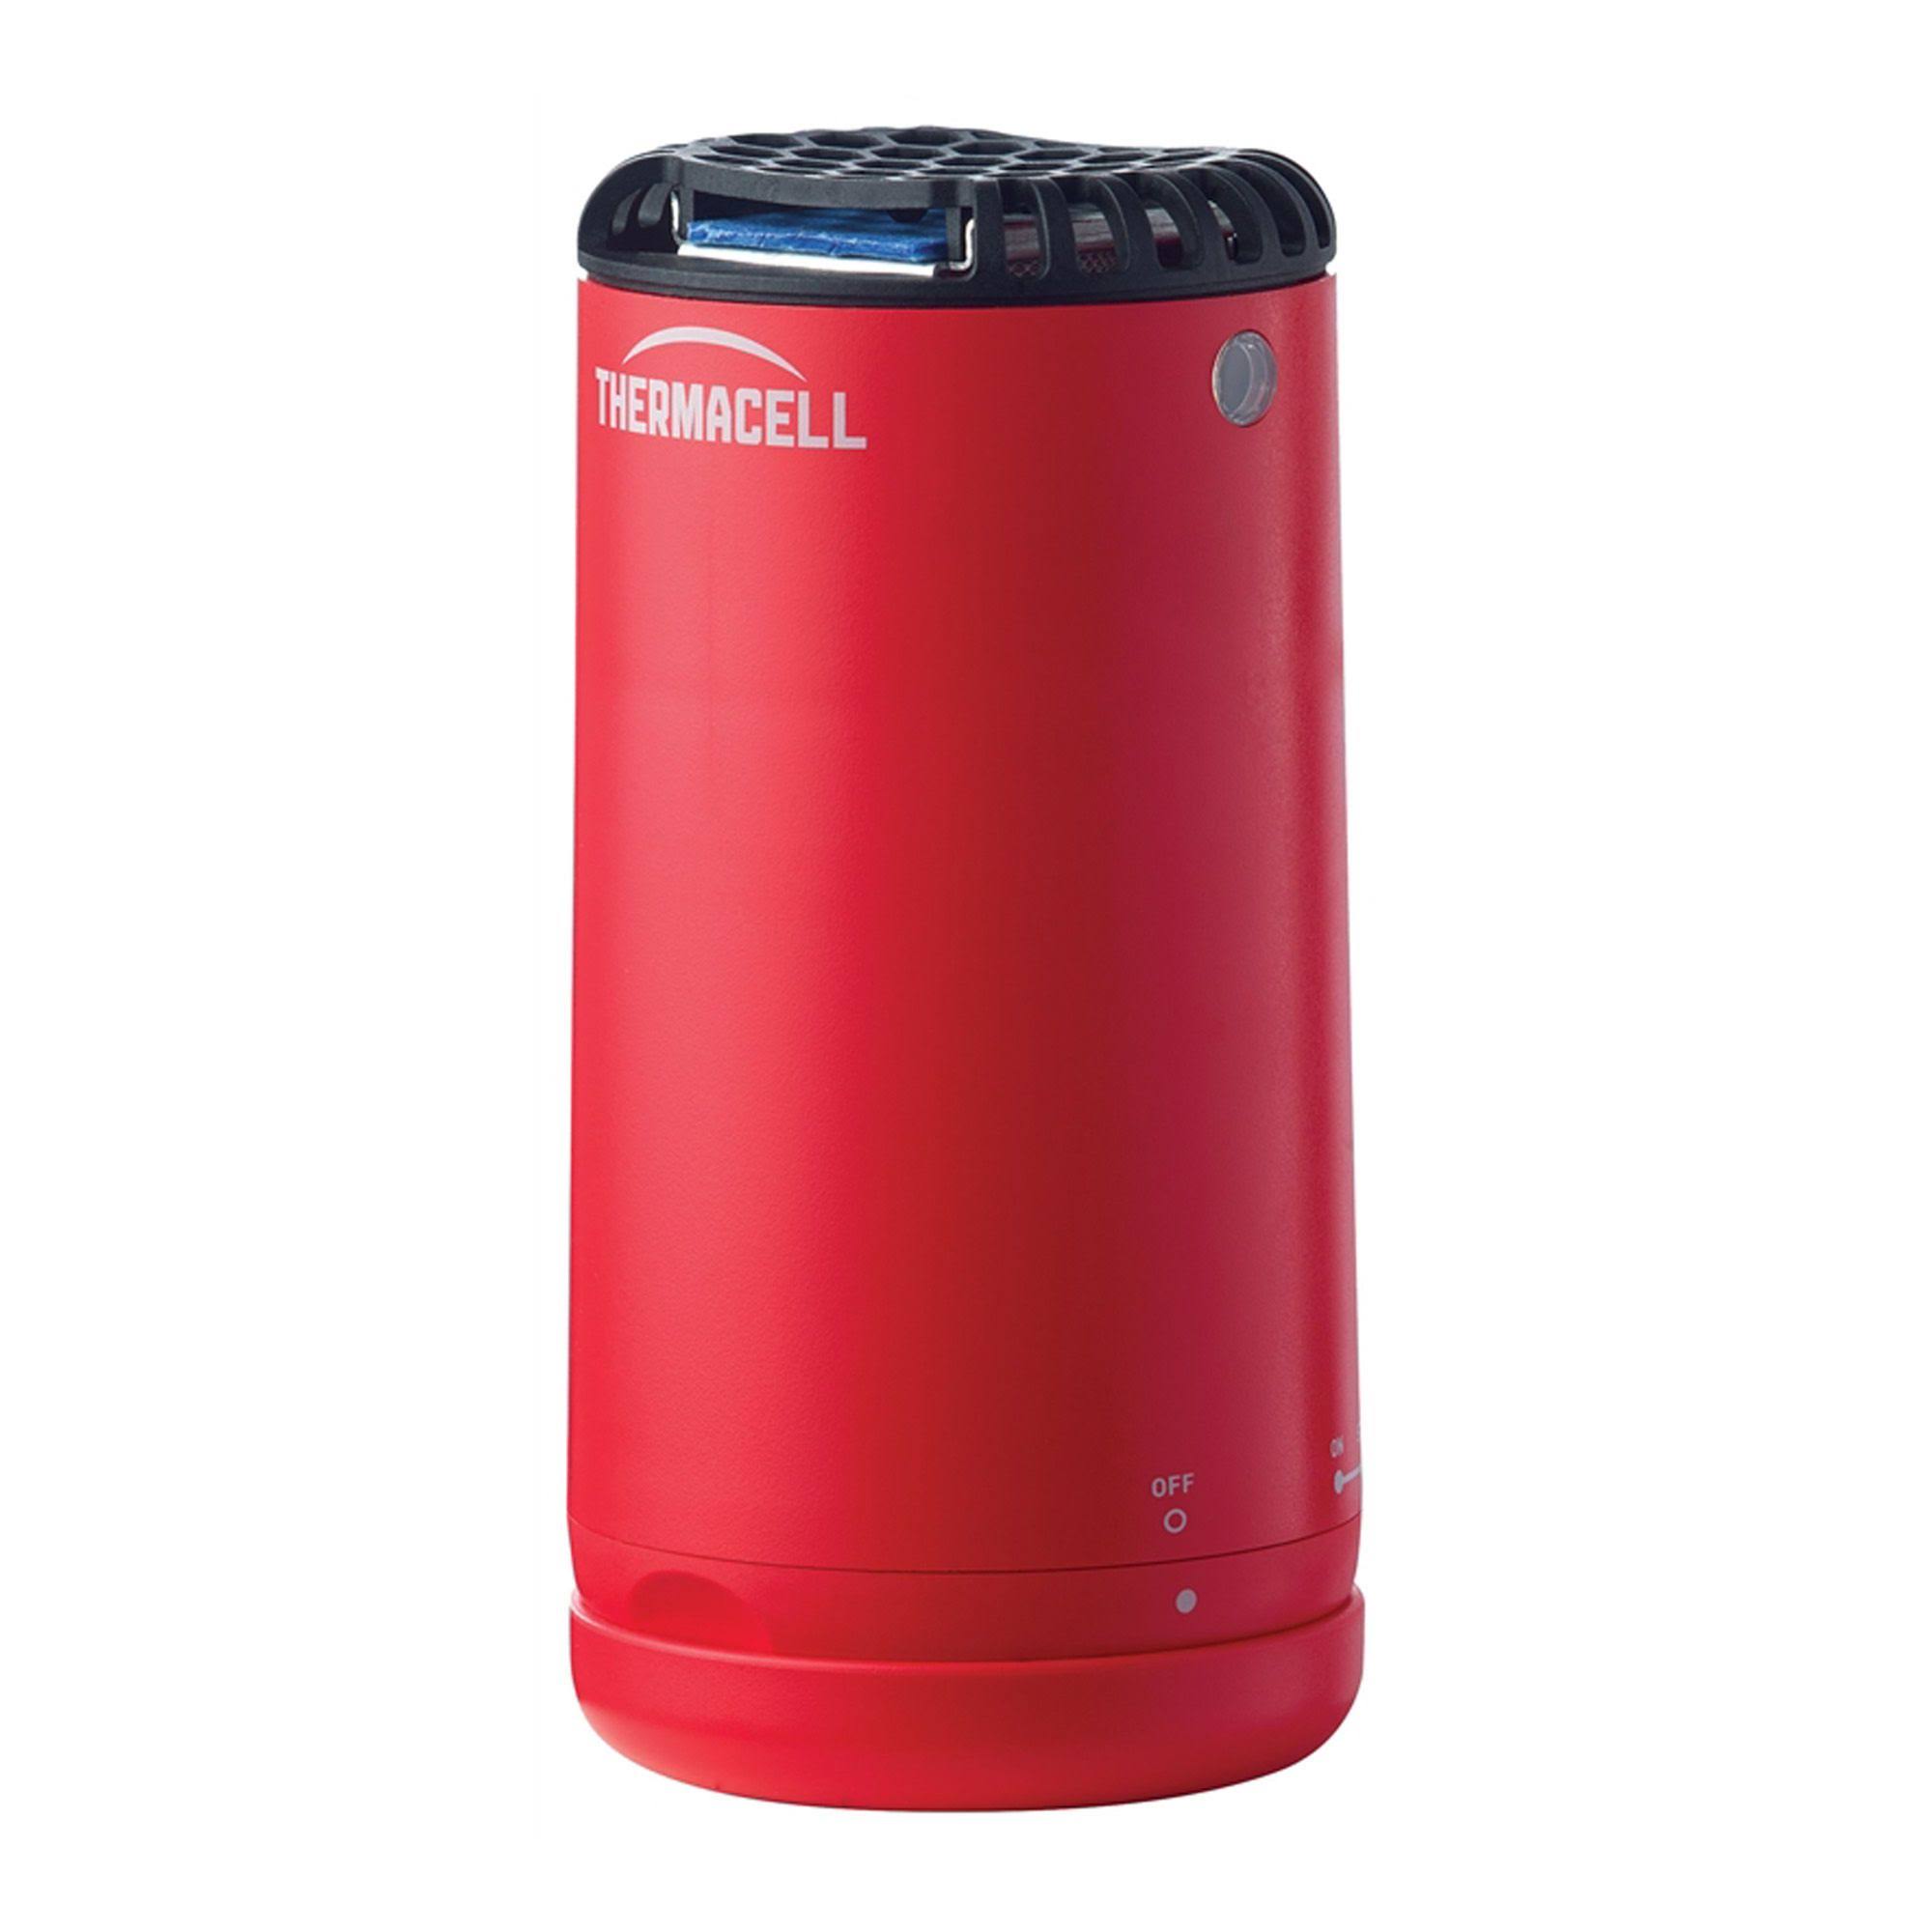 Thermacell Patio Shield Mosquito Repeller - Red